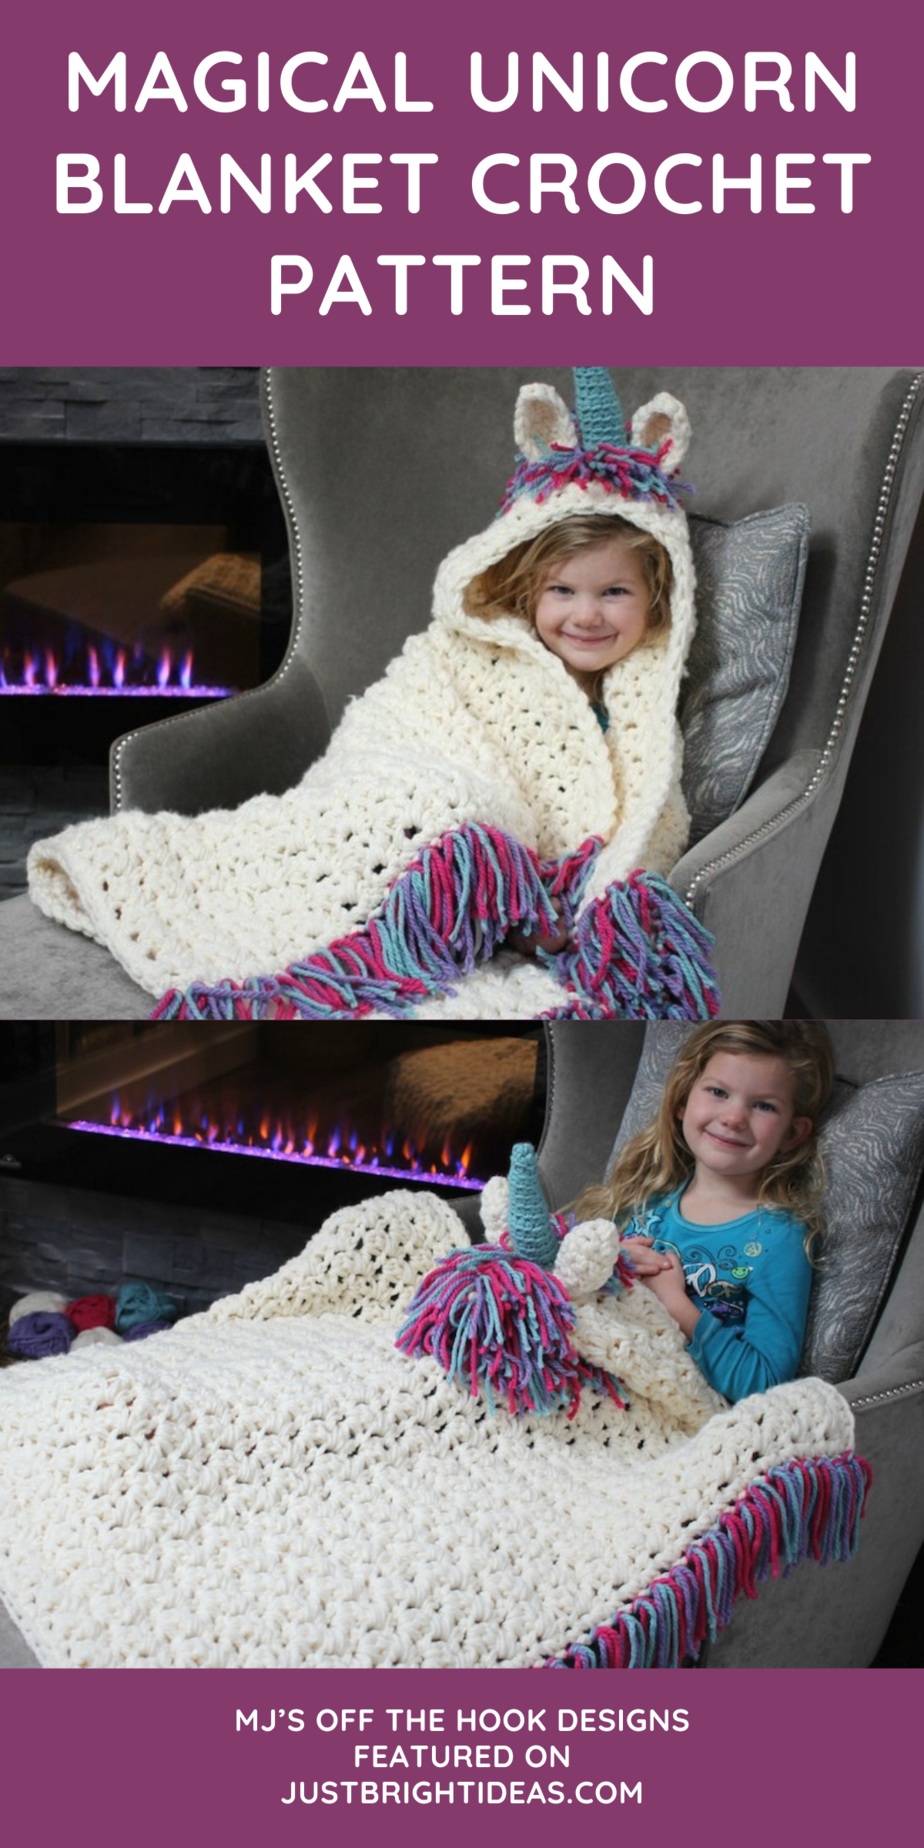 Just look at that unicorn blanket... it's STUNNING! I LOVE the tassels along the edge that match the mane, and oh the horn and the ears on the hood! If your little girl LOVES unicorns she will be in seventh heaven if you make her a blanket to snuggle up in.